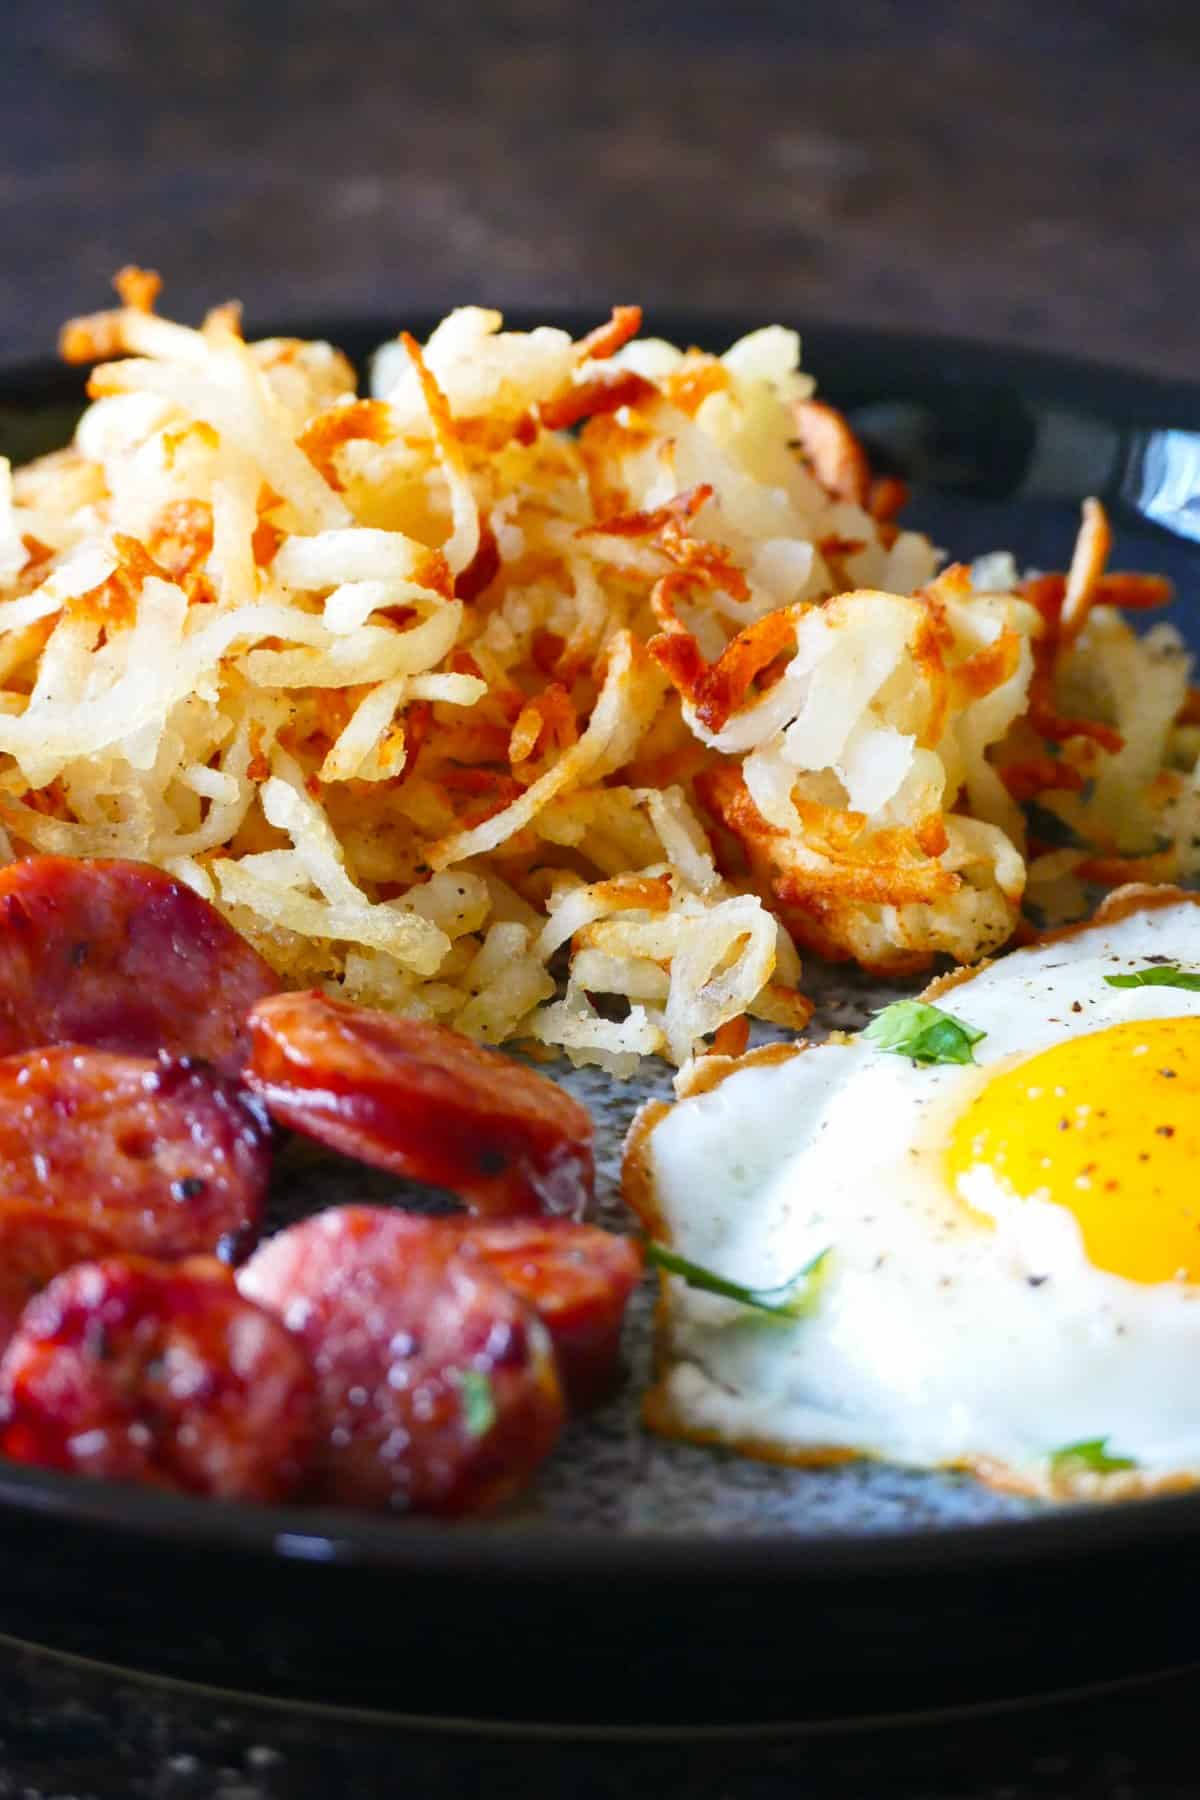 Air fryer frozen hashbrowns - Blue plate with golden brown shredded hashbrowns, fried egg and sliced sausage.